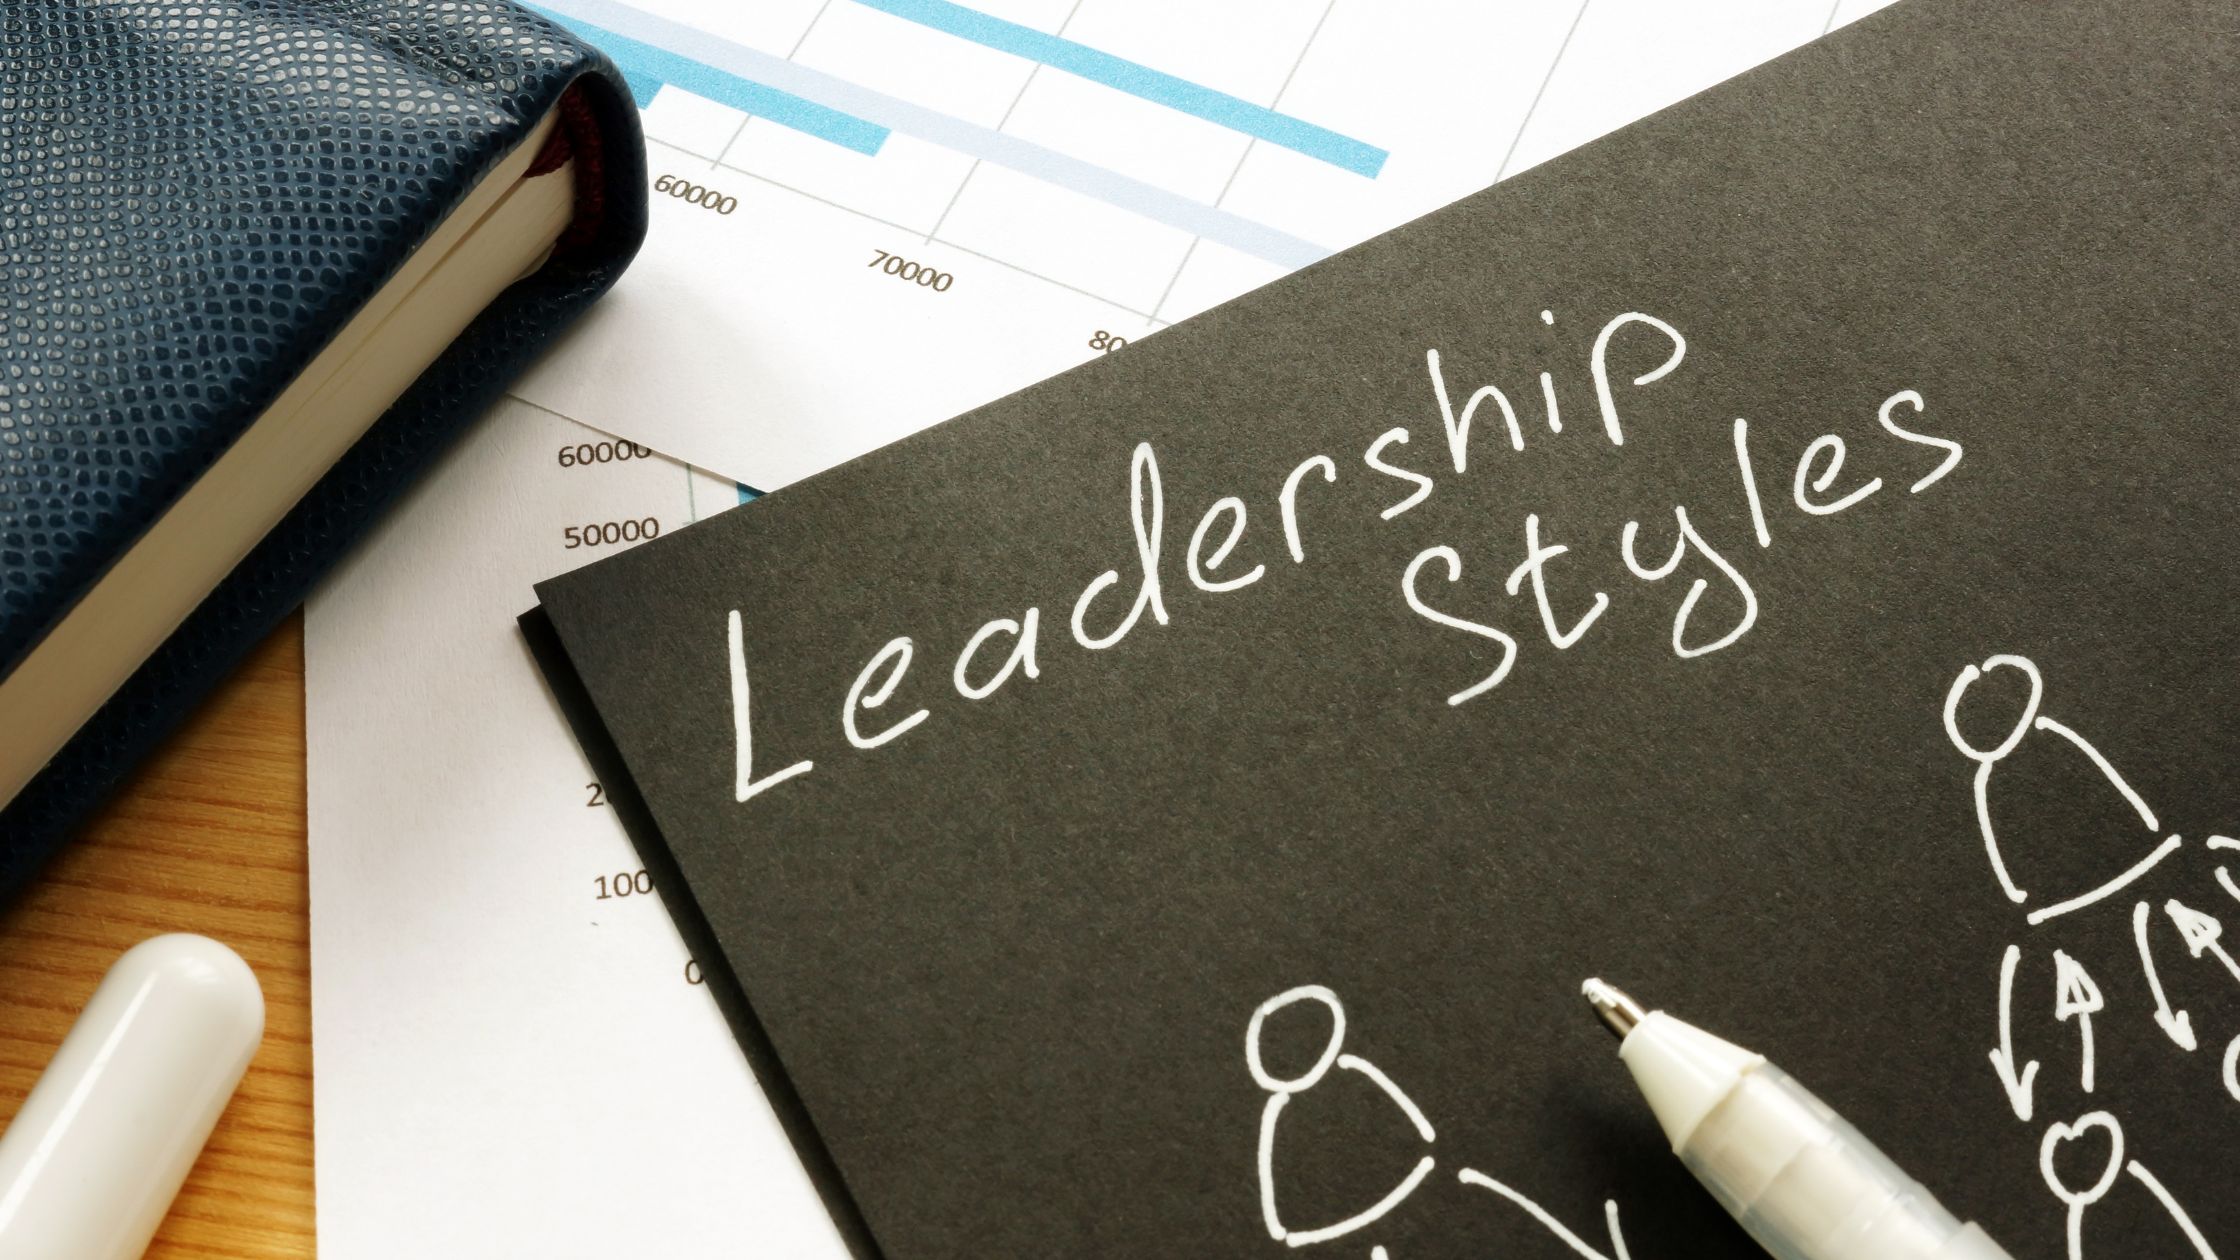 What are the different types of leadership styles